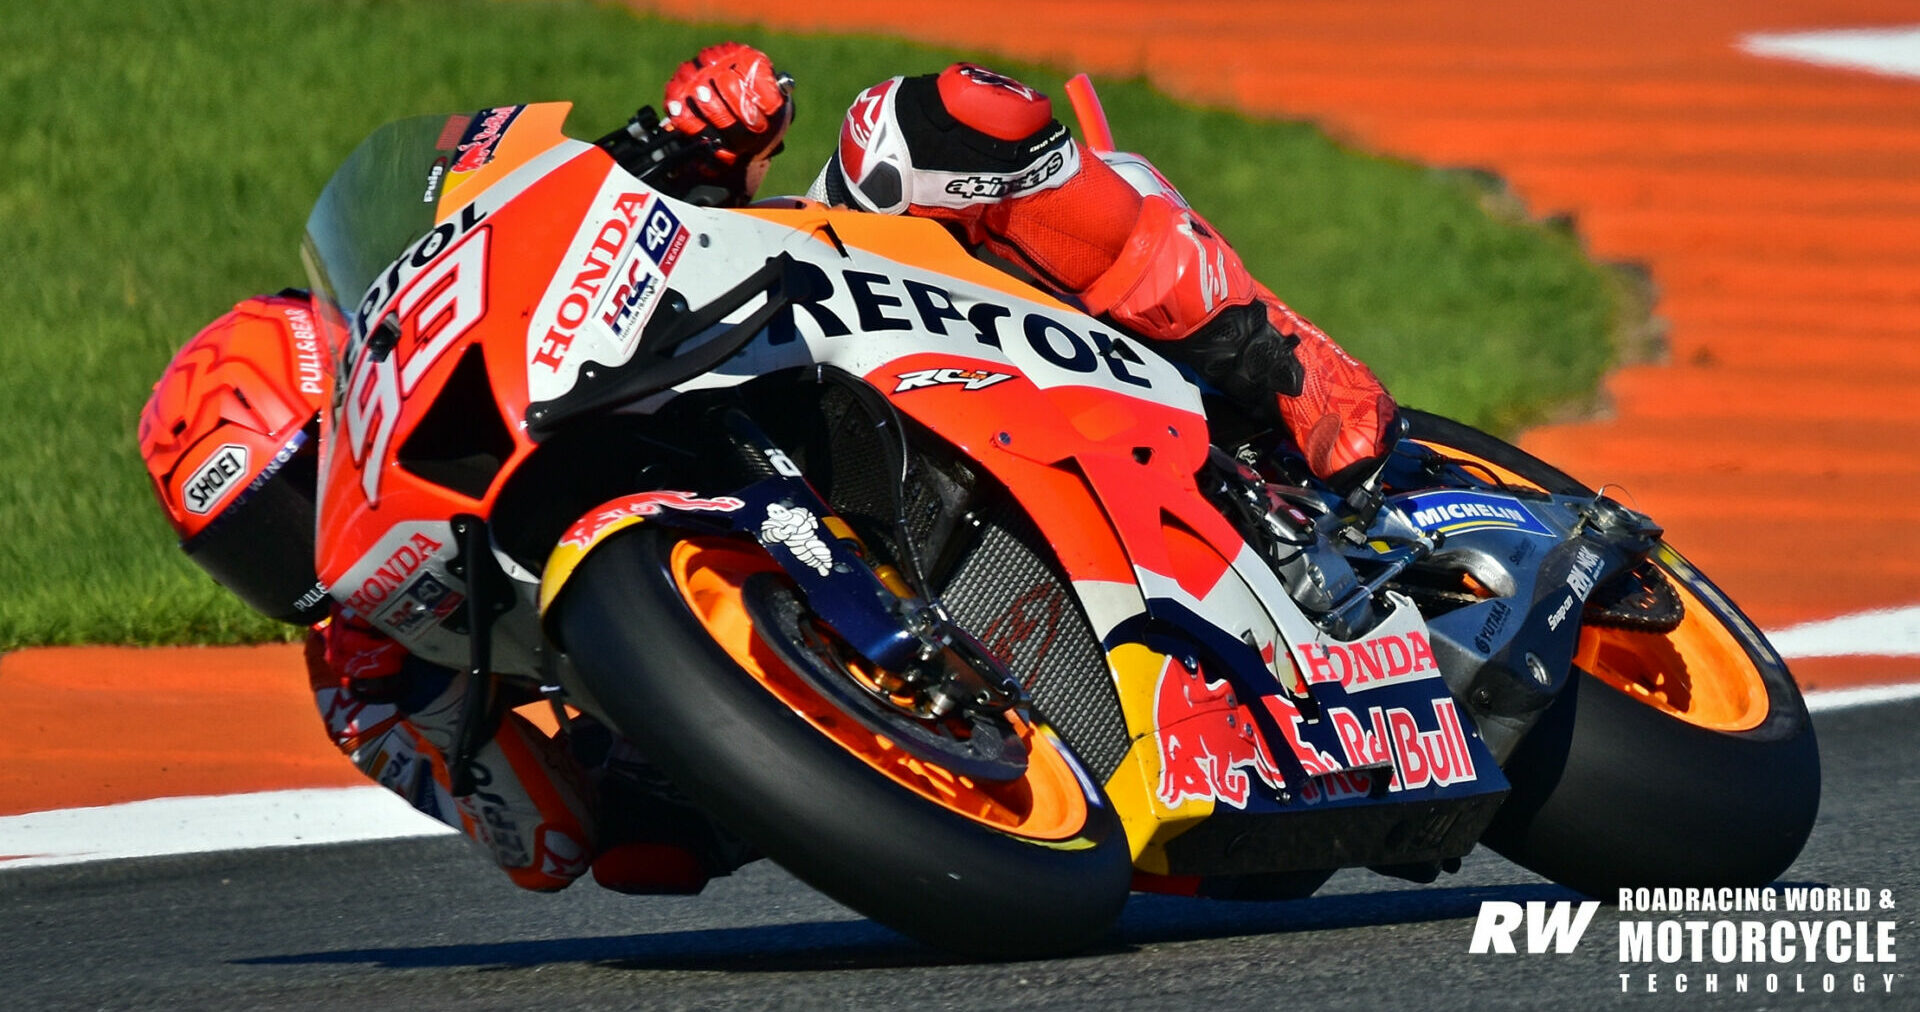 Marc Marquez (93) raced the factory Honda RC213V in this configuration at Valencia. Note the ducting on the fairing sides. Photo by Michael Gougis.